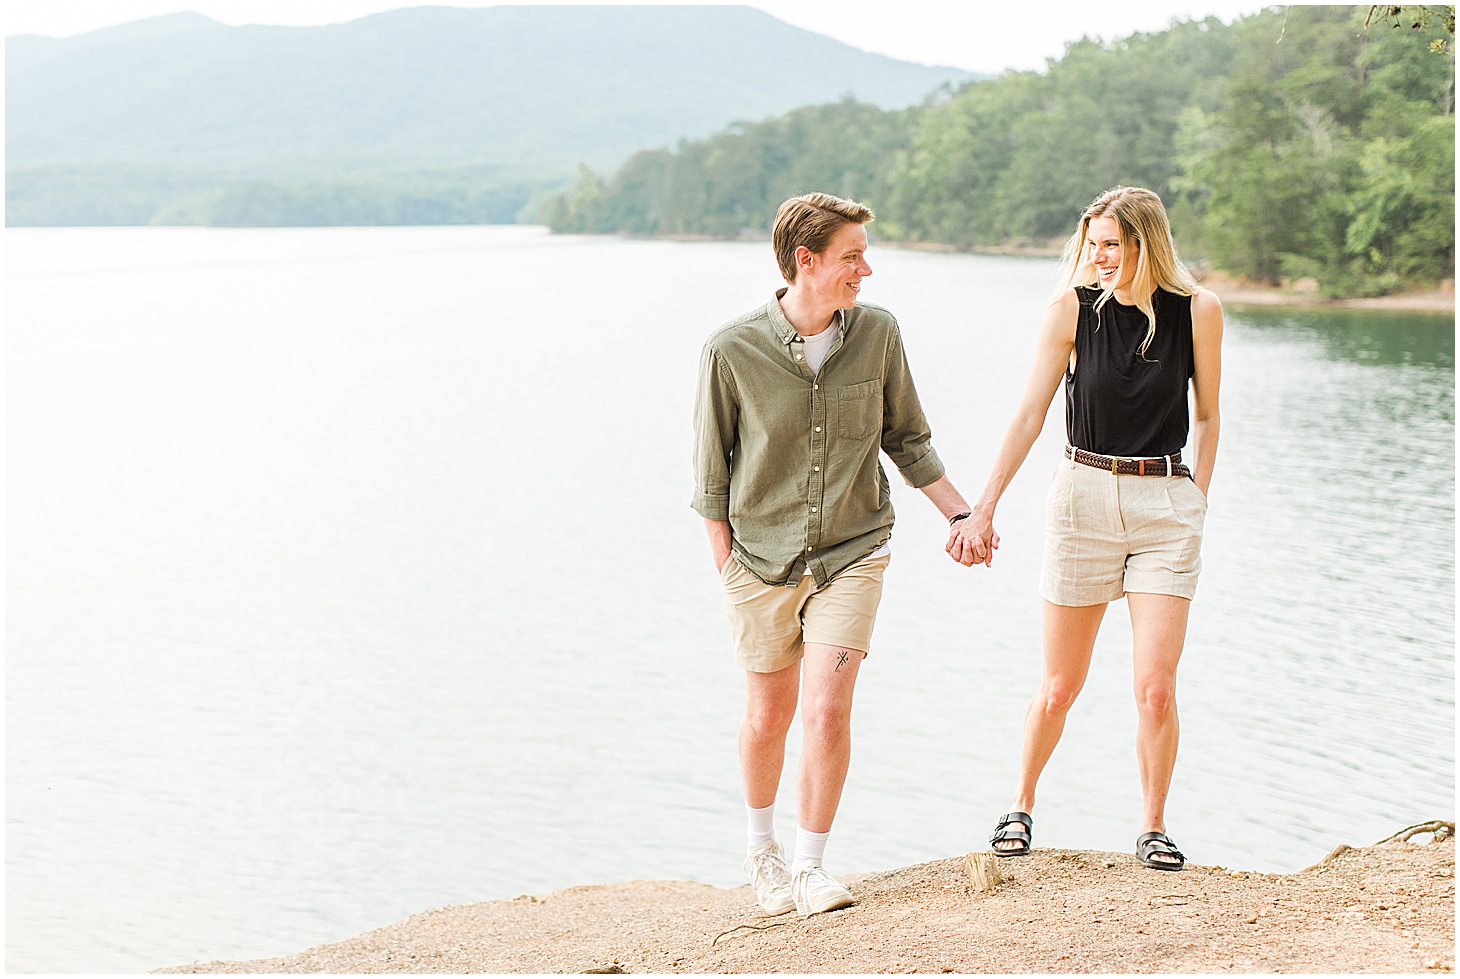 carvinscove_roanokeengagementsession_virginiaweddingphotographer_vaweddingphotographer_photo_0009-1.jpg